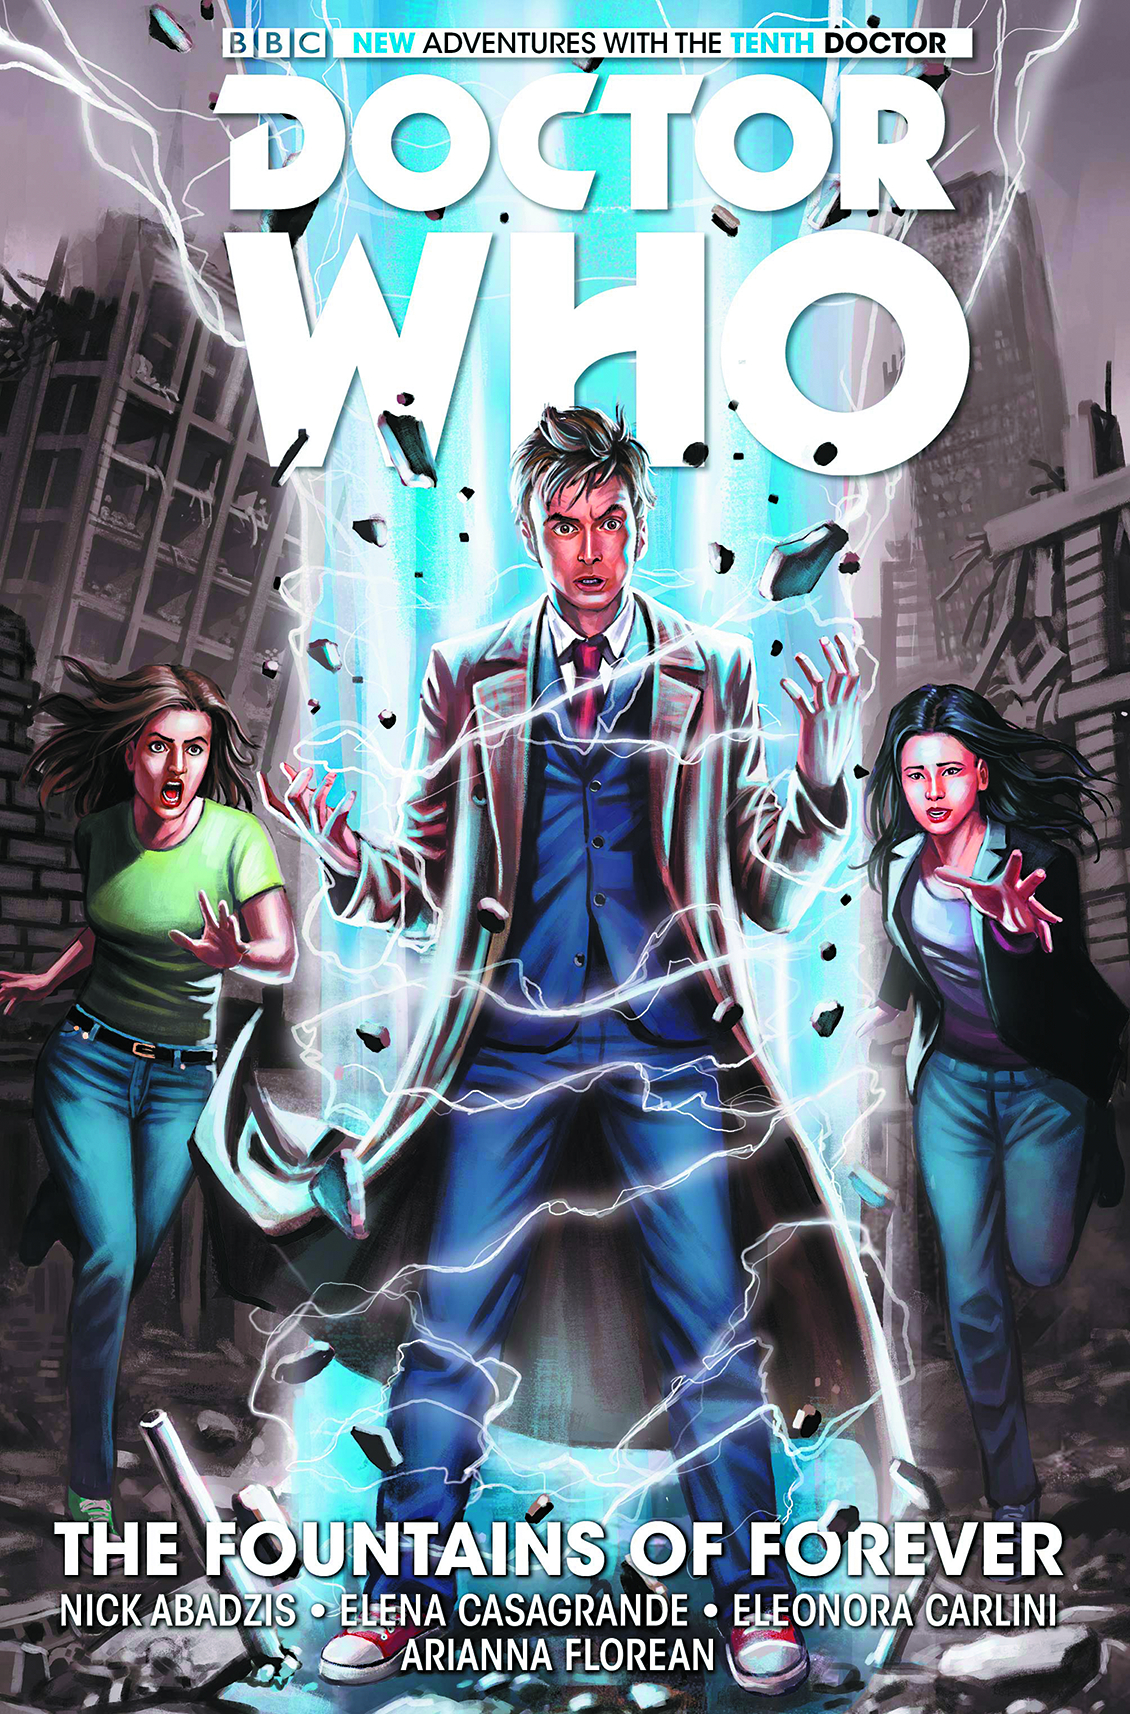 Doctor Who 10th Doctor Hardcover Graphic Novel Volume 3 Fountains of Forever